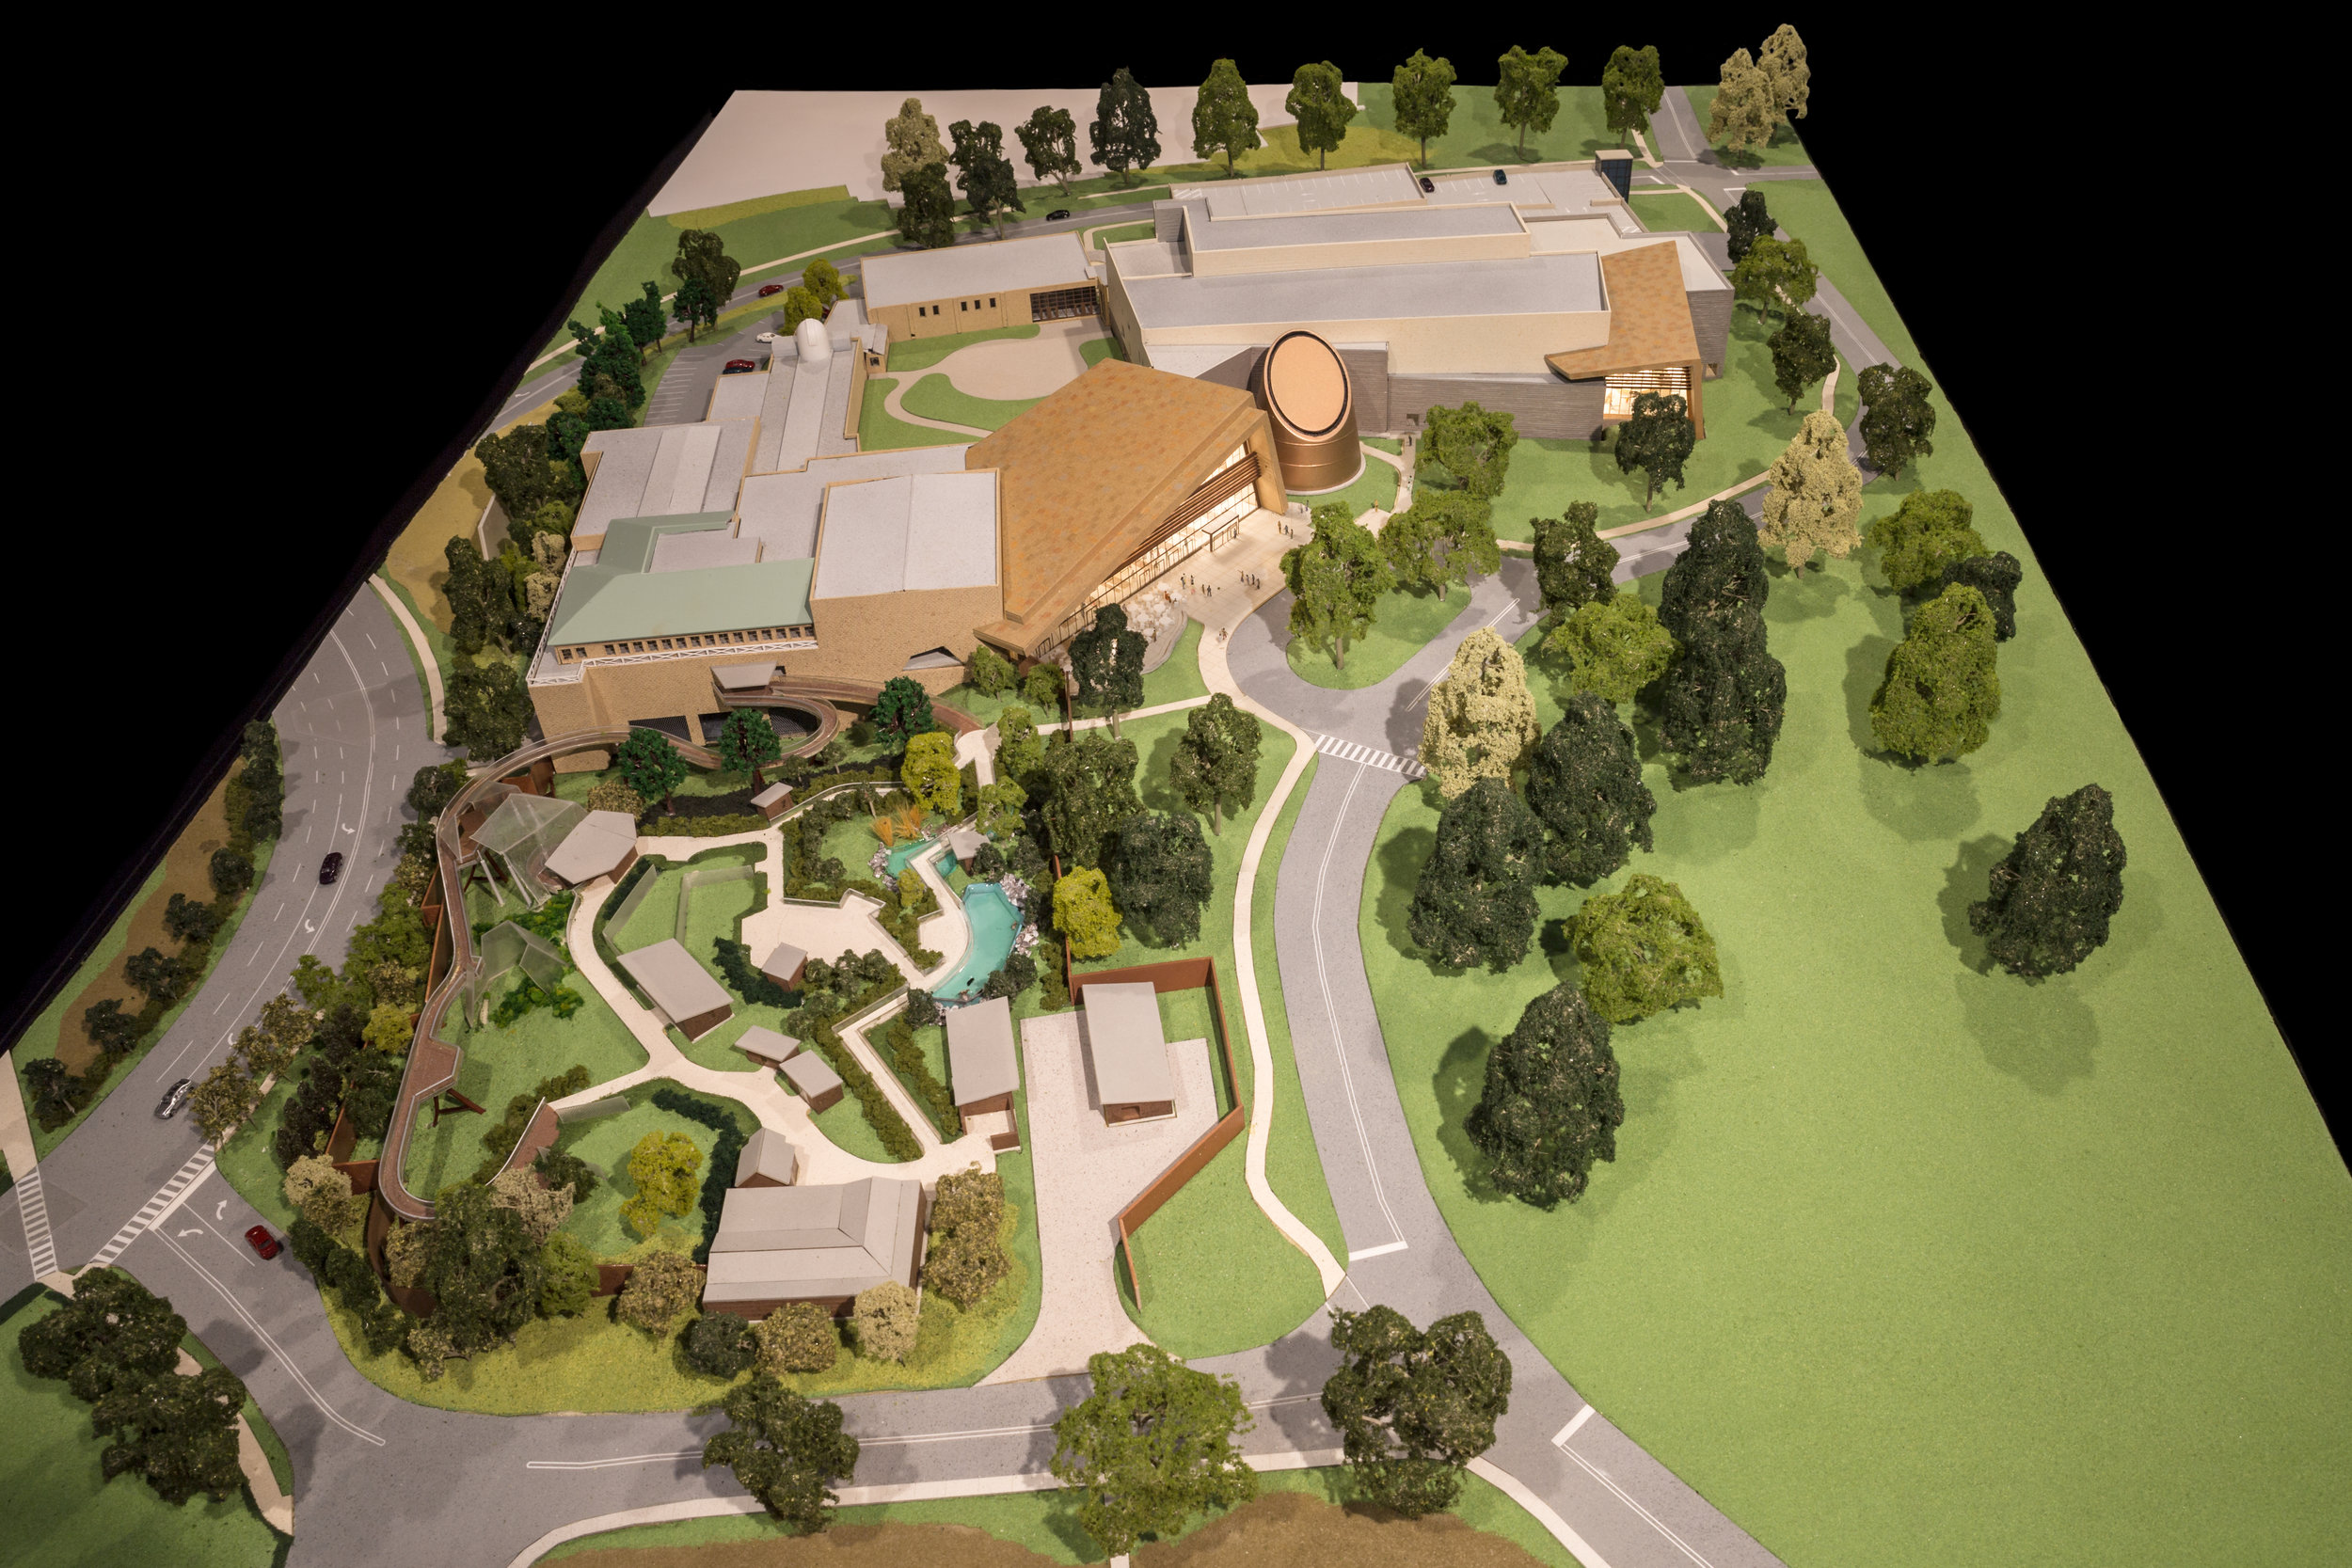 3-D Architectural Model of the Cleveland Museum of Natural History for RMI Designs